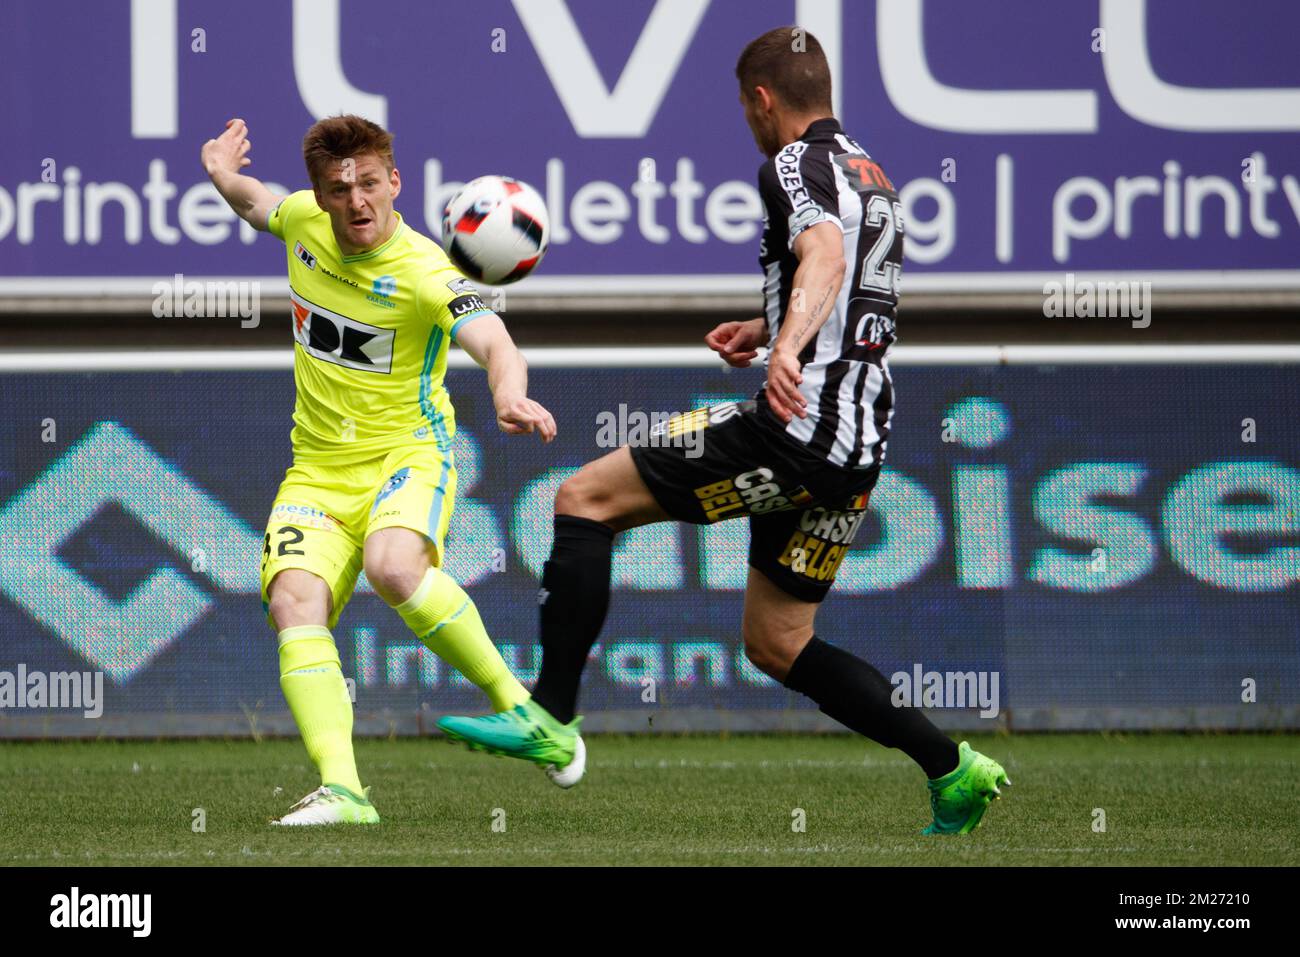 Gent's Thomas Foket and Charleroi's Steeven Willems fight for the ball during the Jupiler Pro League match between KAA Gent and Sporting Charleroi, in Gent, Sunday 14 May 2017, on day 8 (out of 10) of the Play-off 1 of the Belgian soccer championship. BELGA PHOTO KURT DESPLENTER Stock Photo